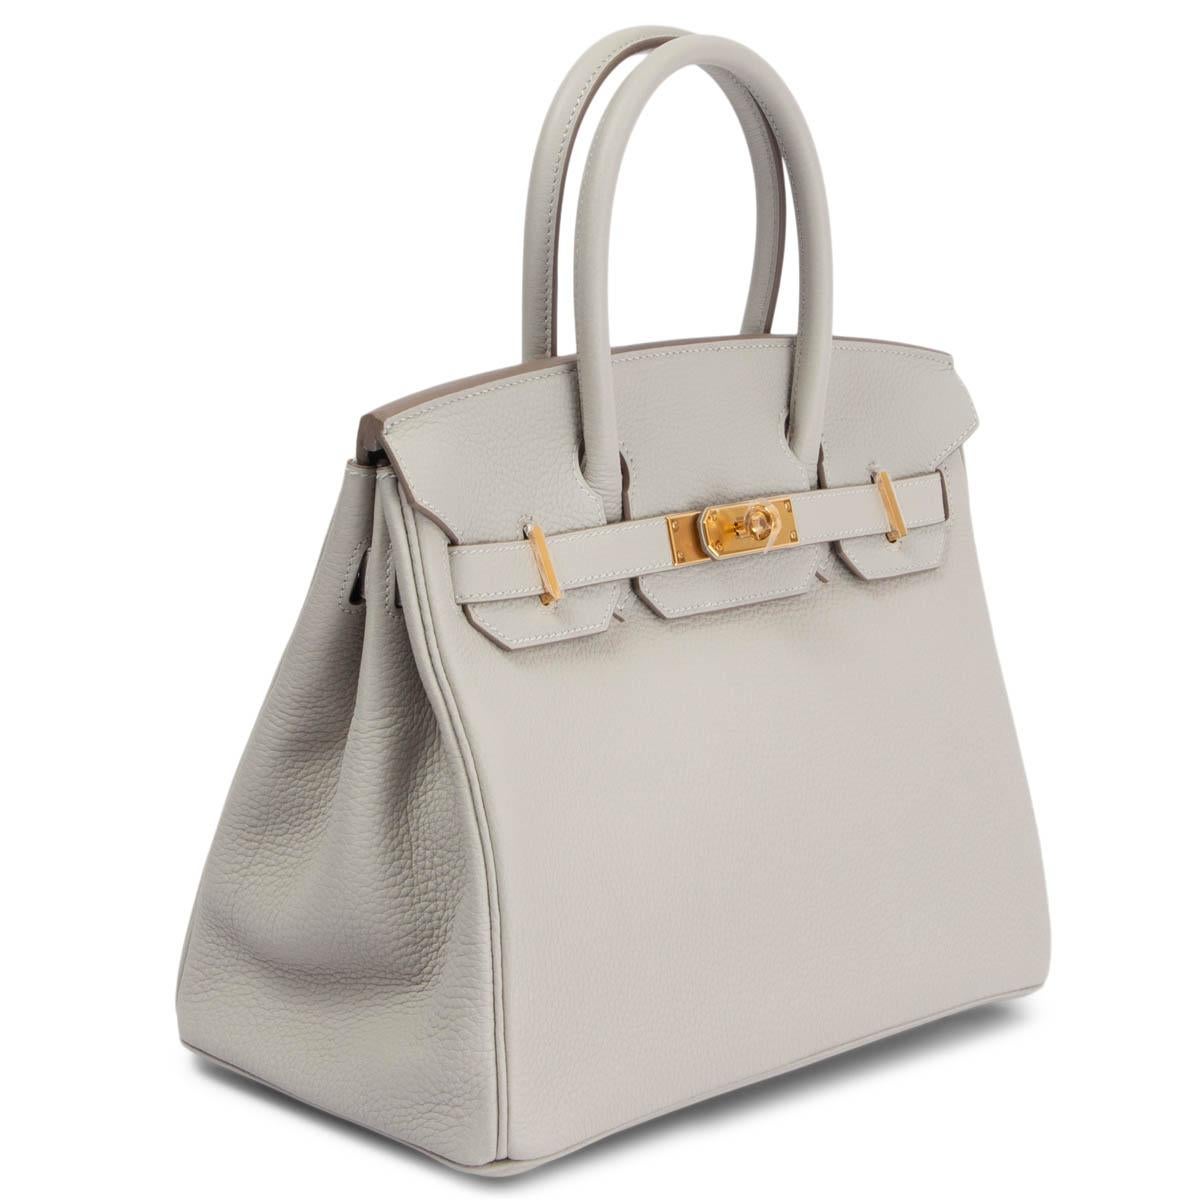 100% authentic Hermès Birkin 30 bag in Gris Perle (pale grey) Togo leather with gold-plated hardware. Lined in Chevre (goat skin) with an open pocket against the front and a zipper pocket against the back. Brand new condition. Full